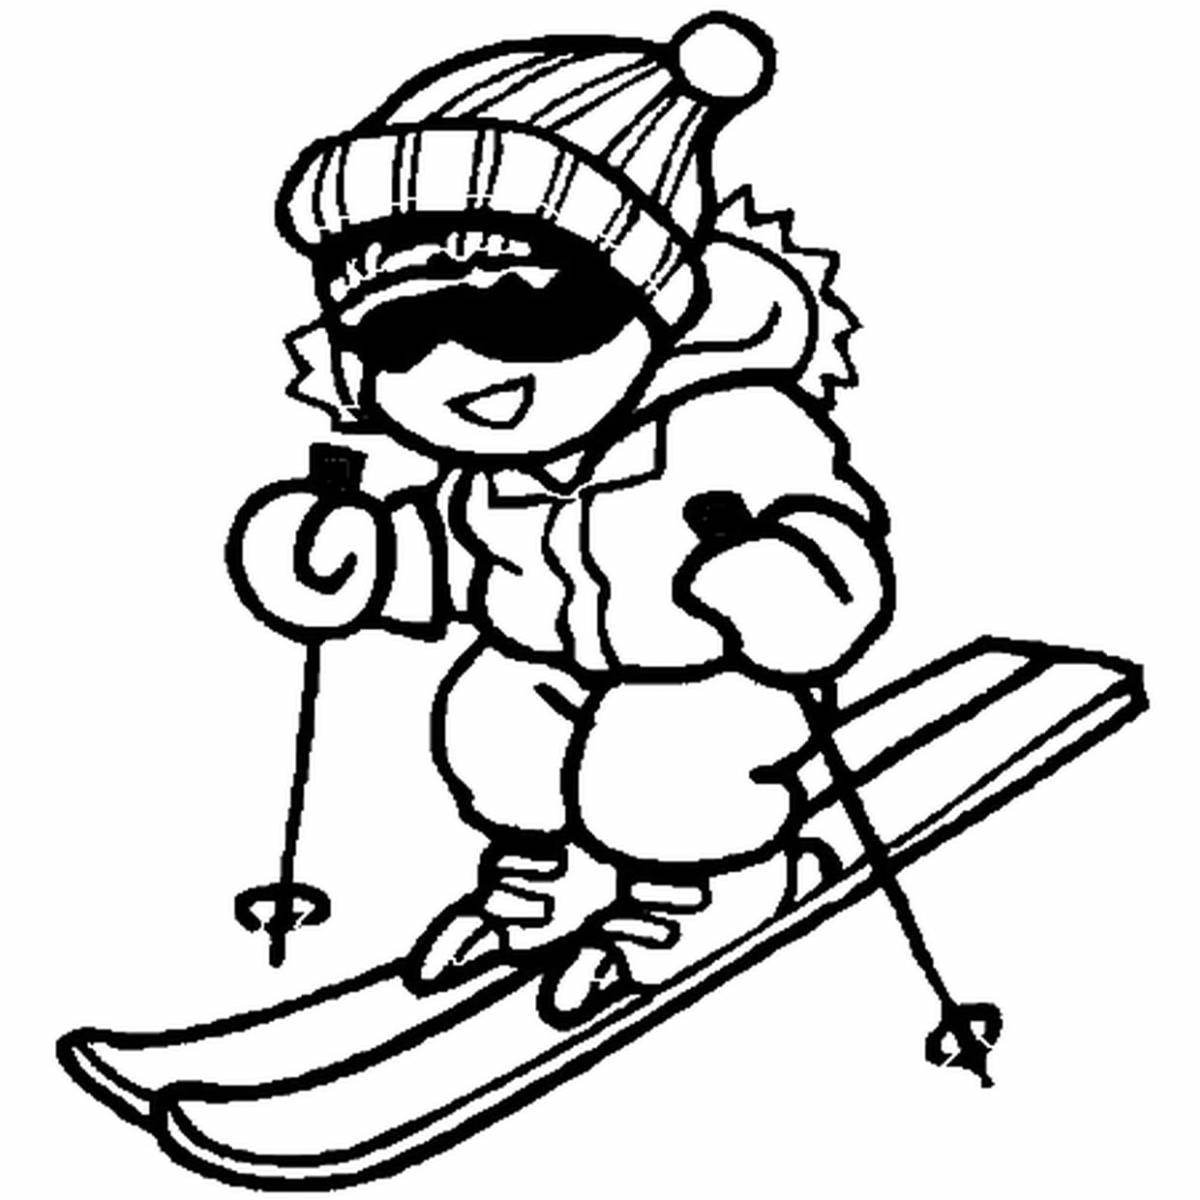 Exquisite skier coloring page